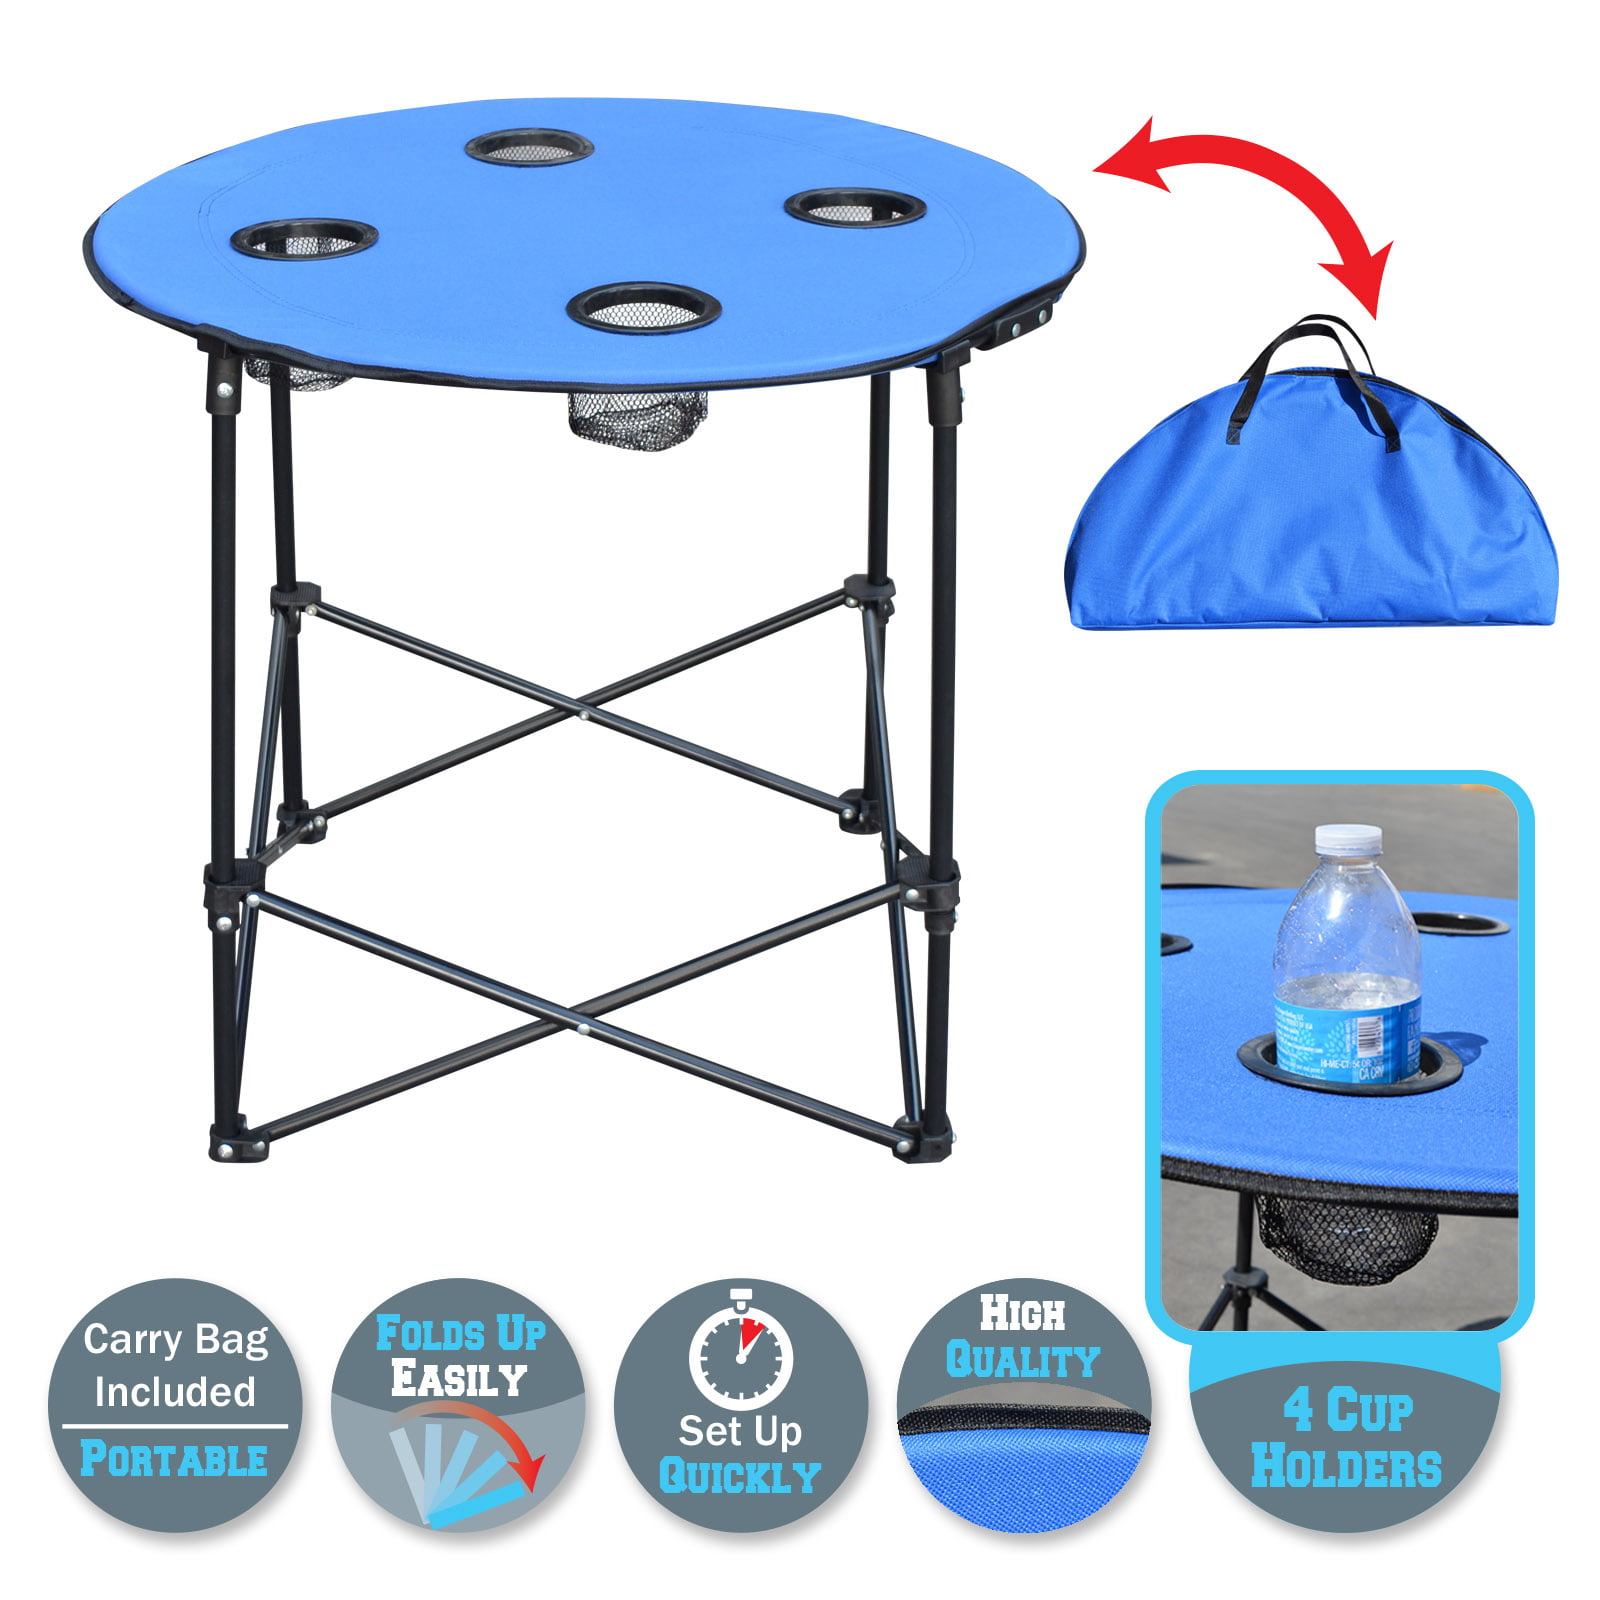 Without Shelf Carry Case Included BenefitUSA Folding Picnic Table Dia 27.5 Collapsible Round Table with 4 Cup Holders 